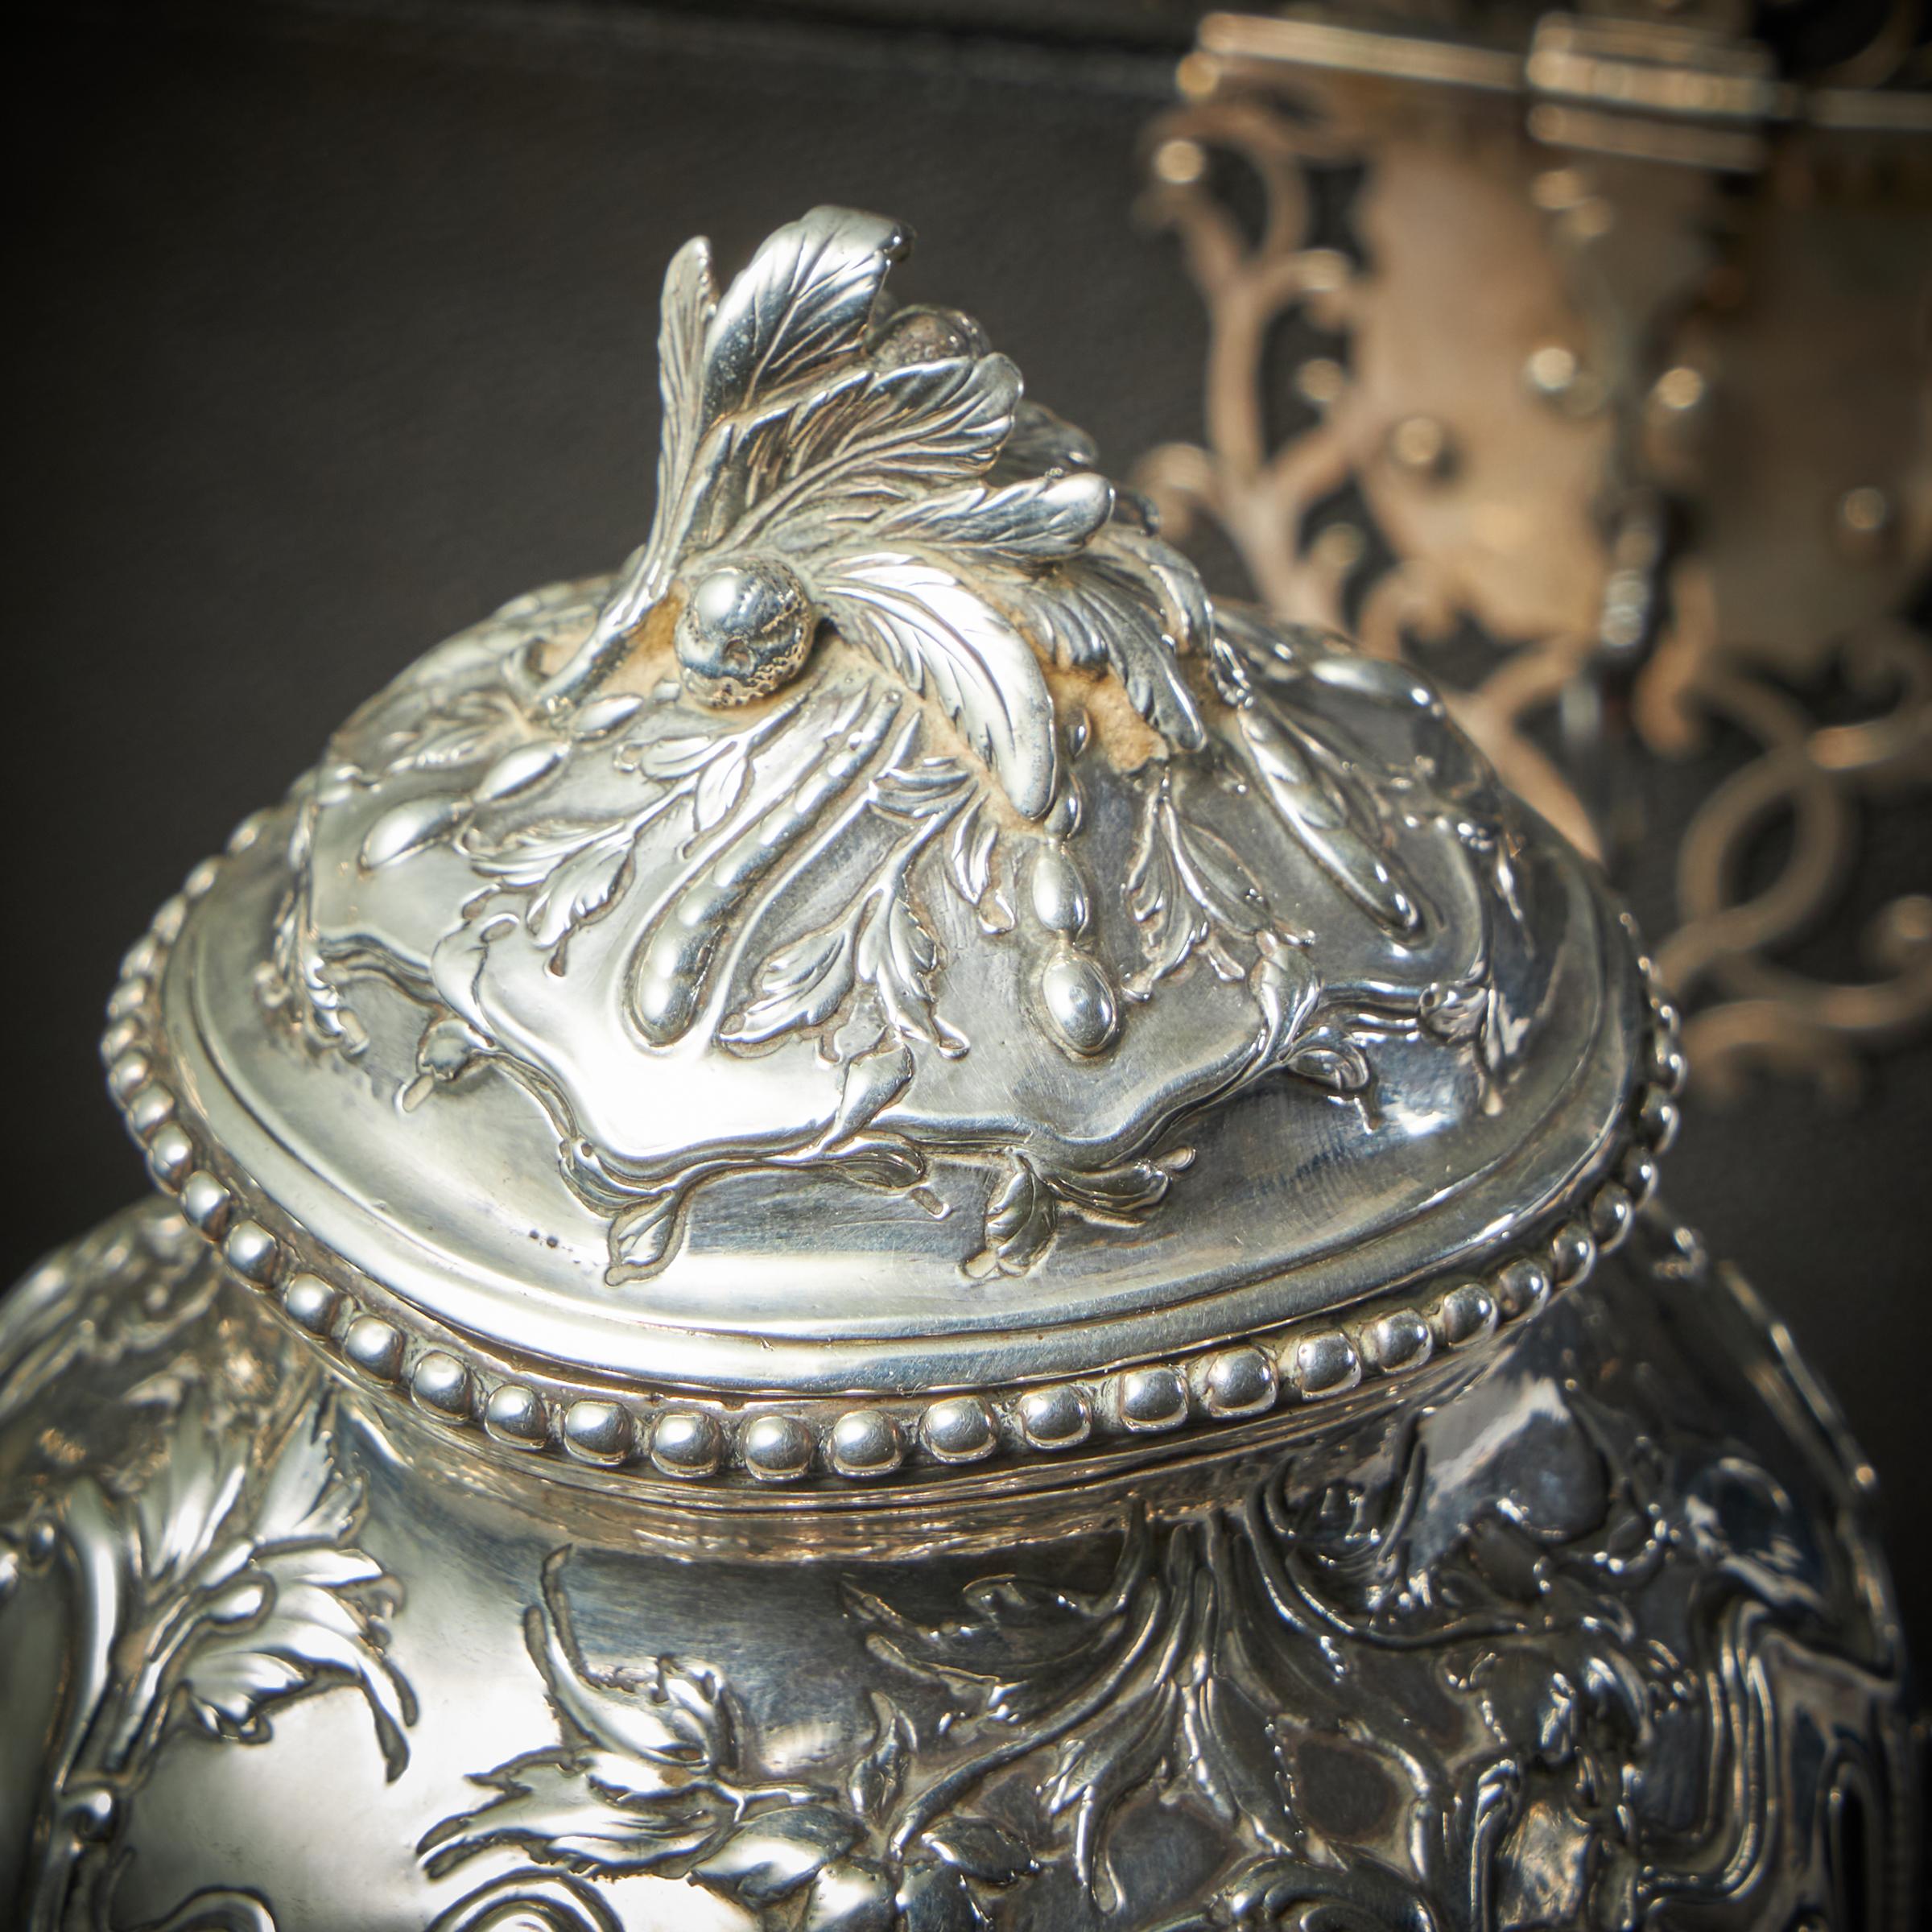 A Rare Silver Mounted George II Shagreen Tea Caddy with Silver Rocco Canistors-13